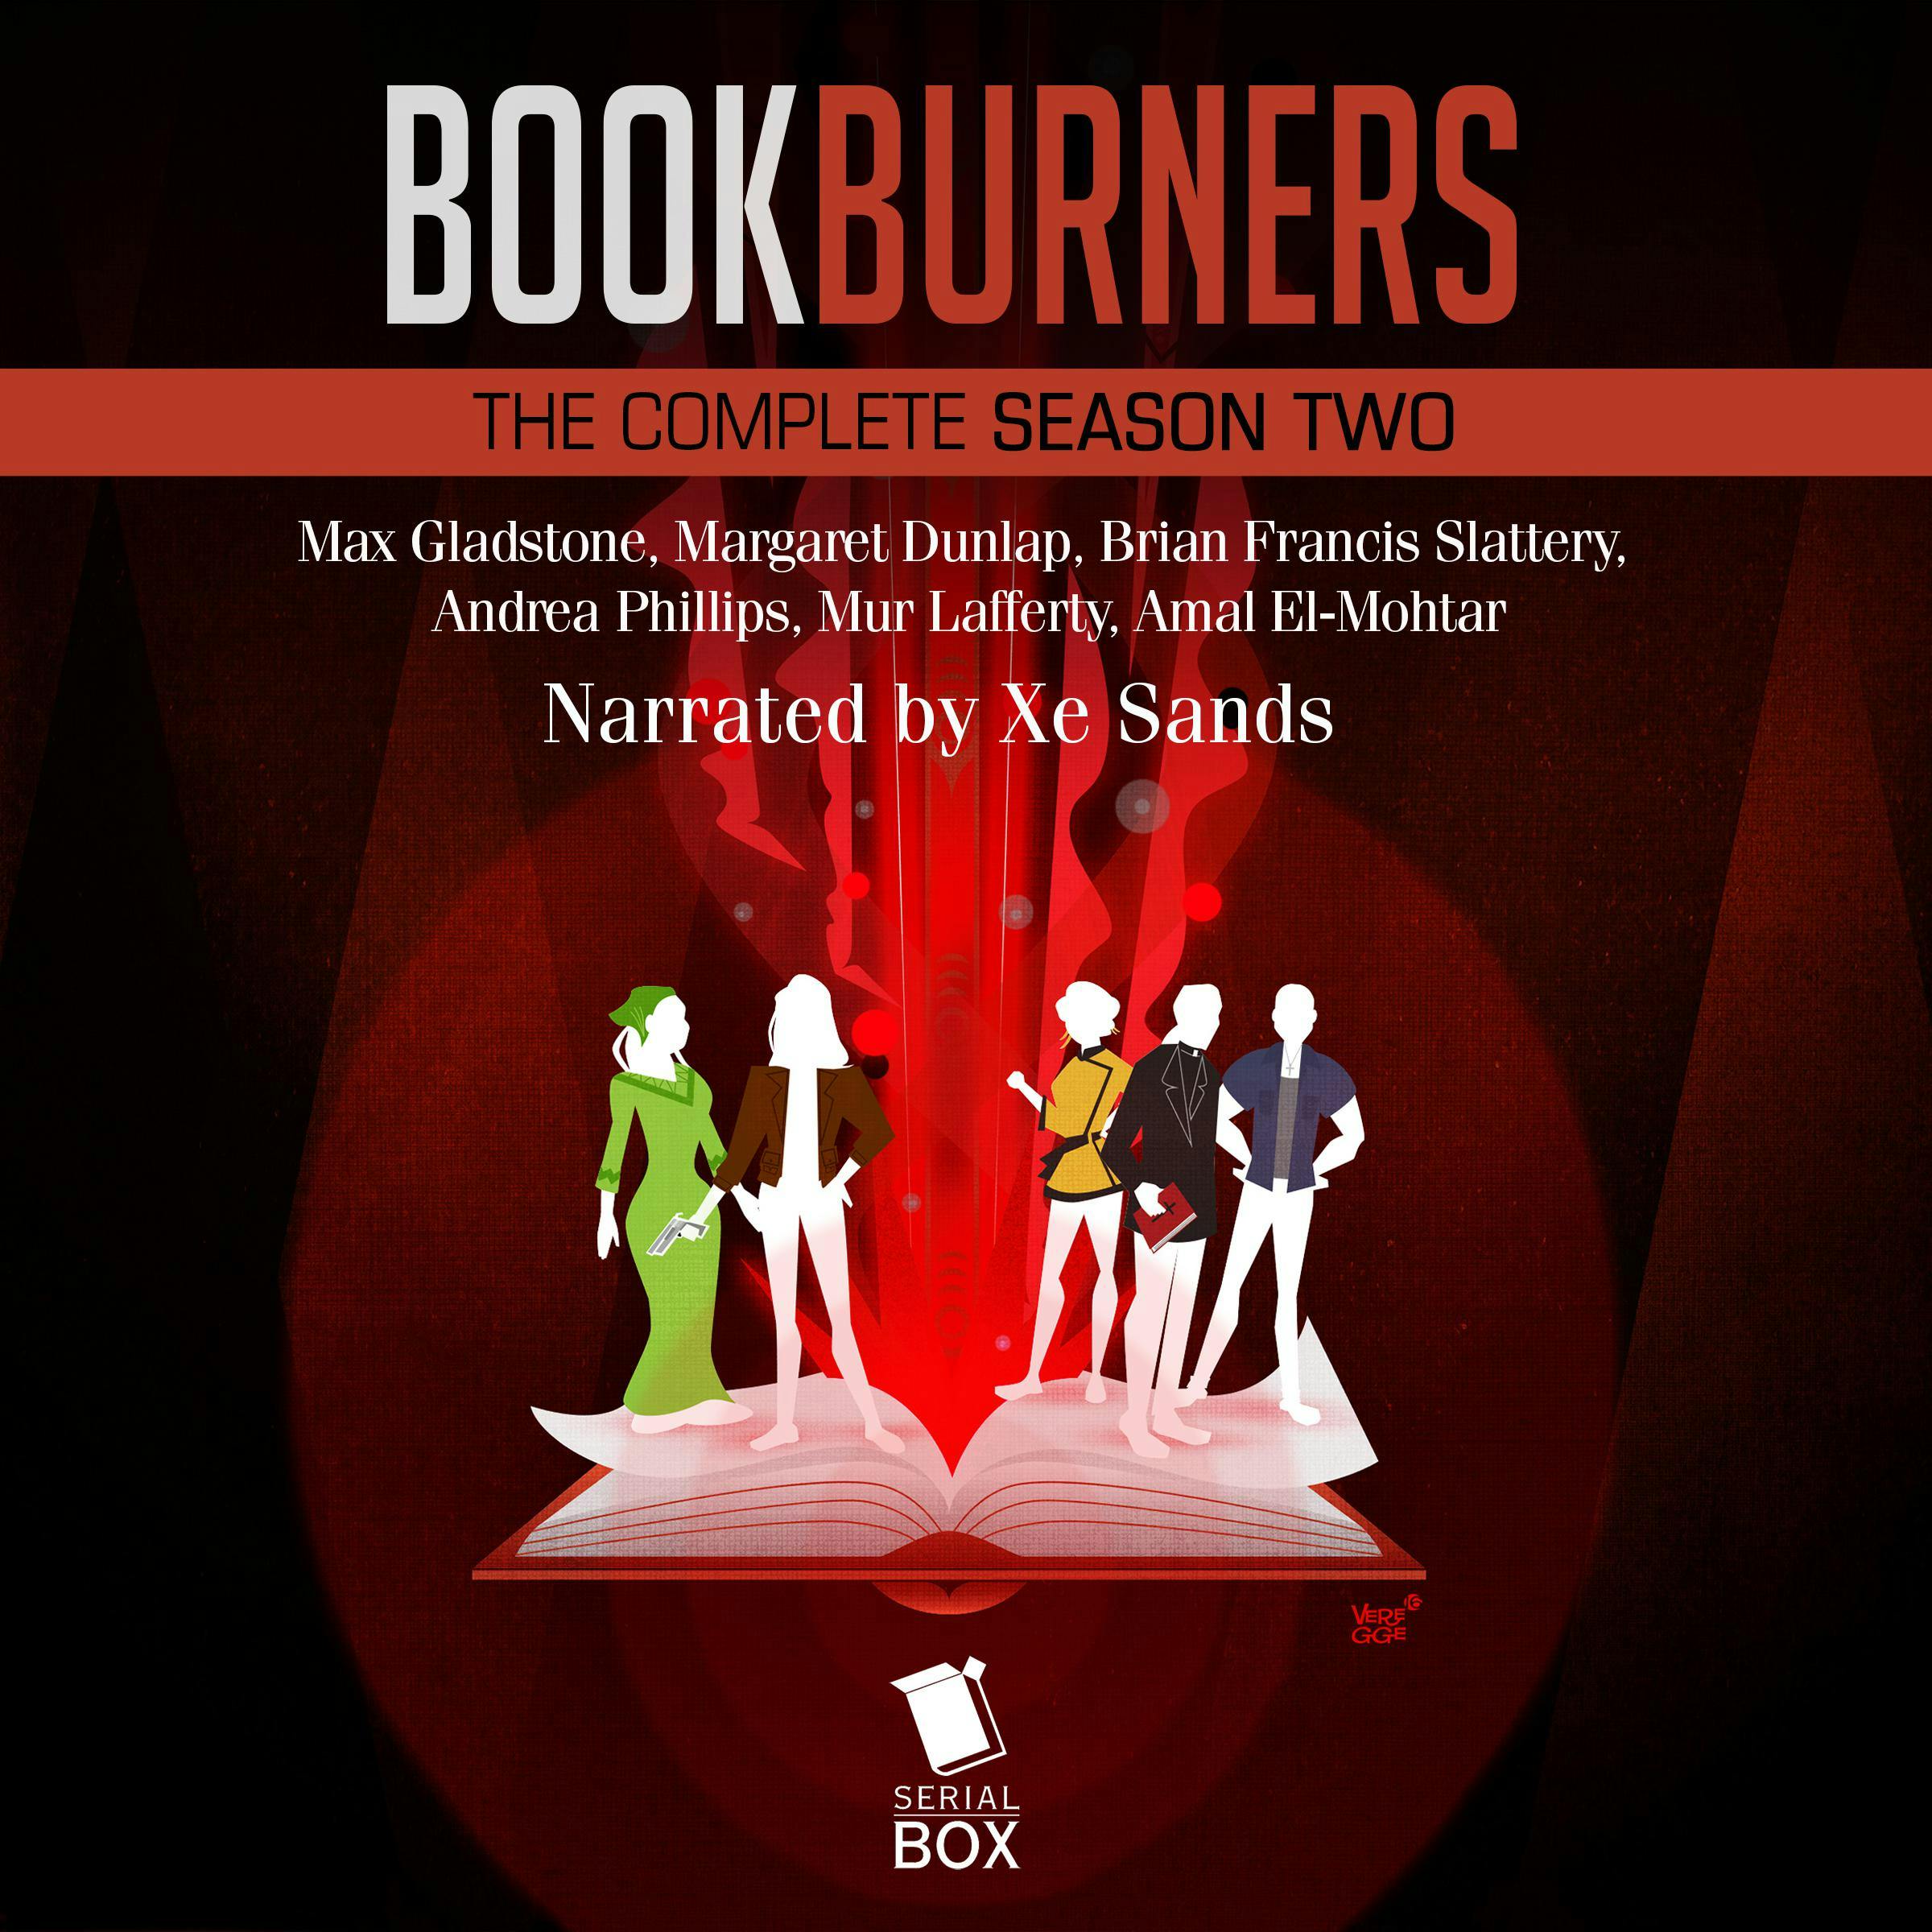 Bookburners: Season 2, Episode 7: Fire and Ice - Amal El-Mohtar